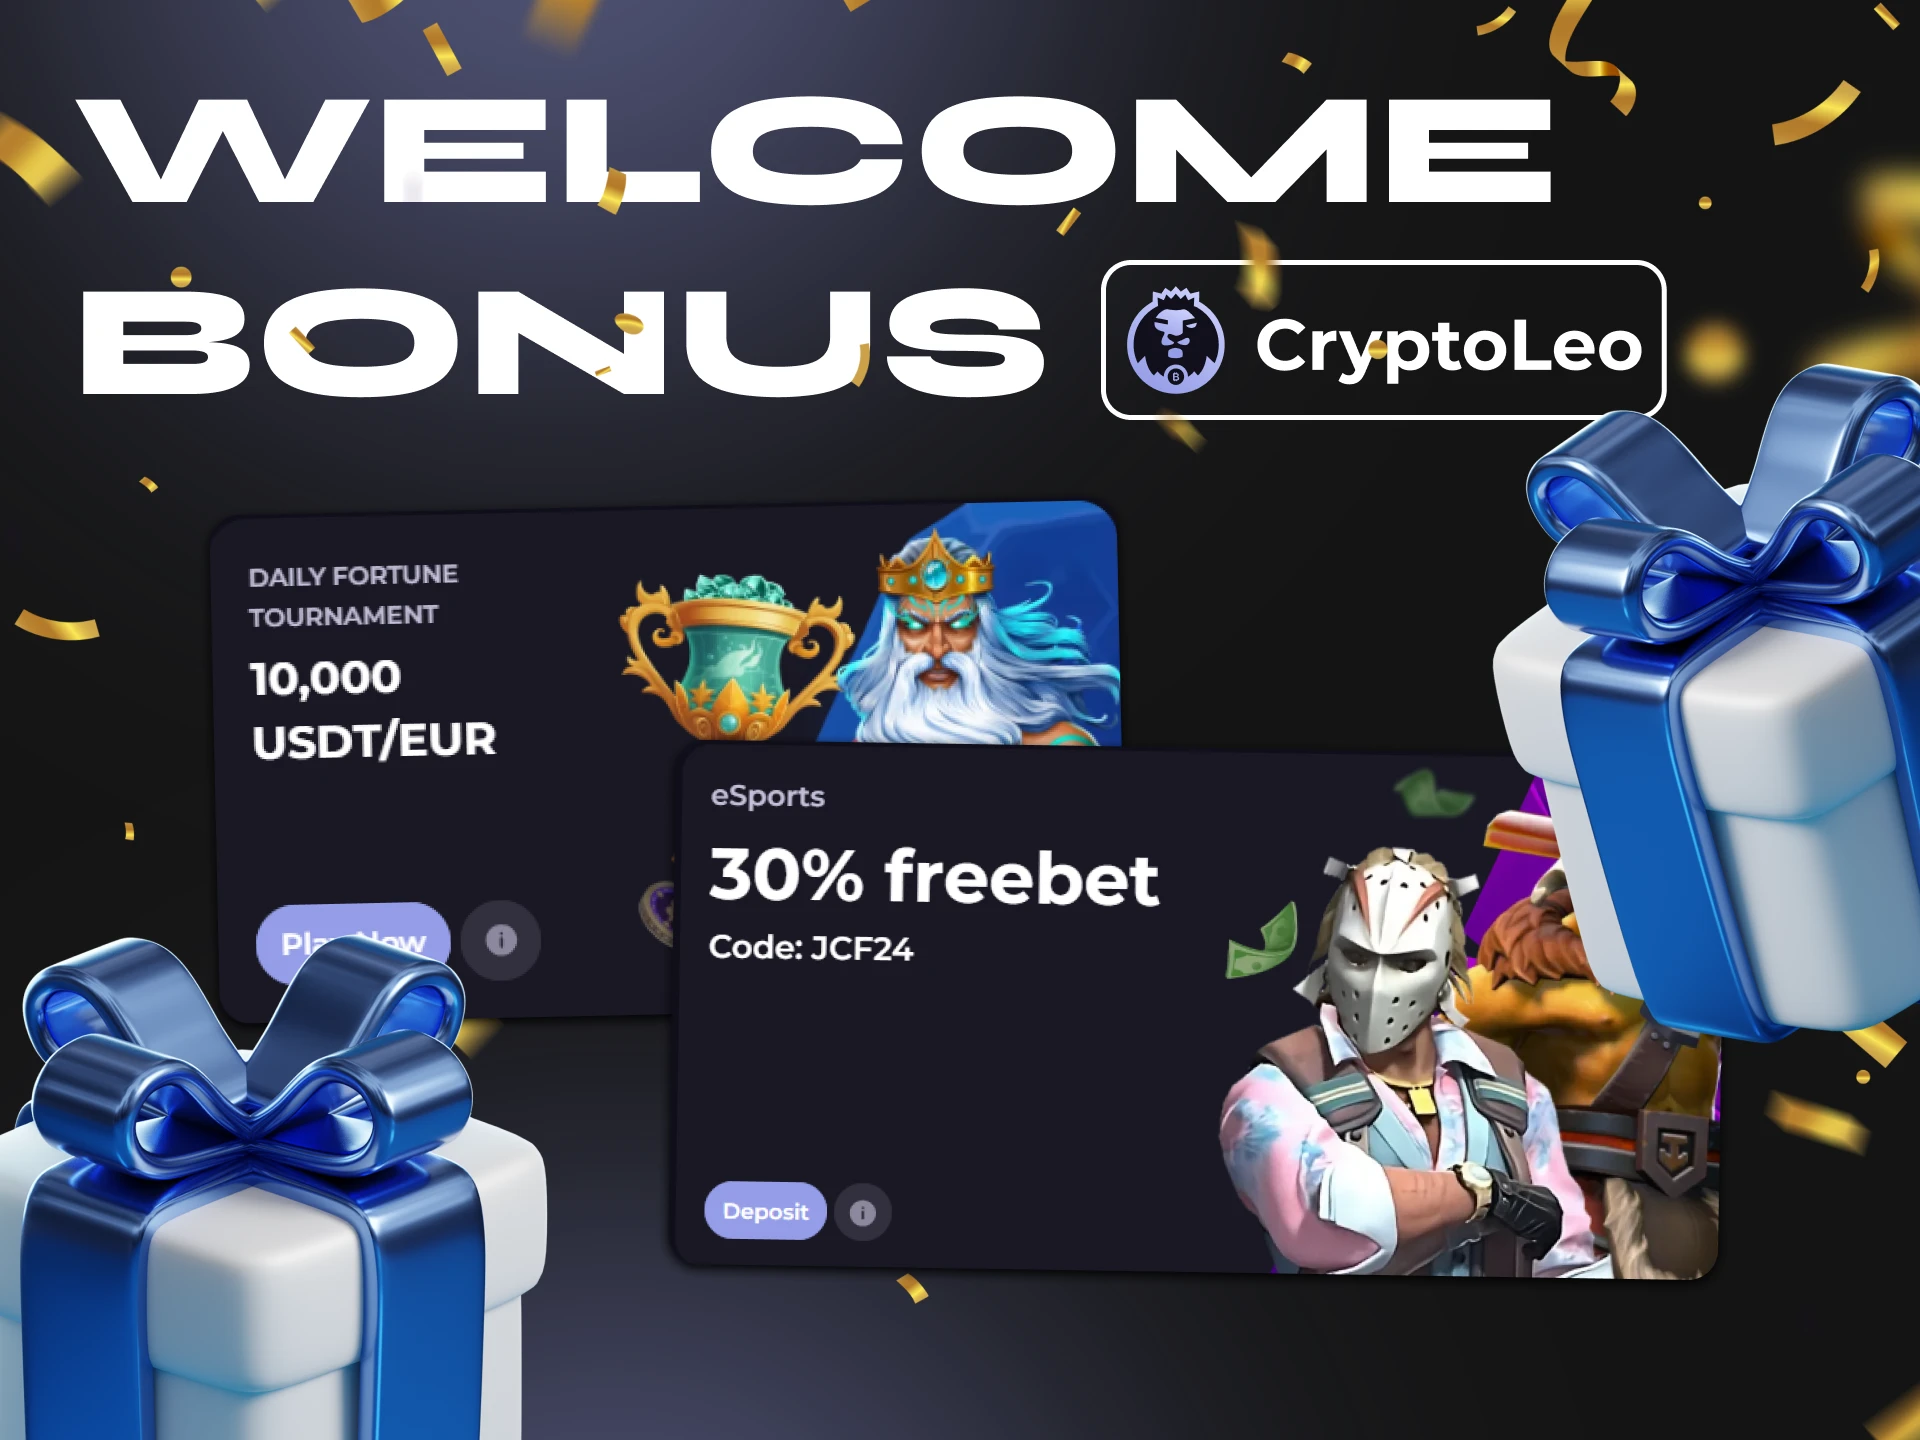 Register with Cryptoleo to receive a lucrative welcome bonus.